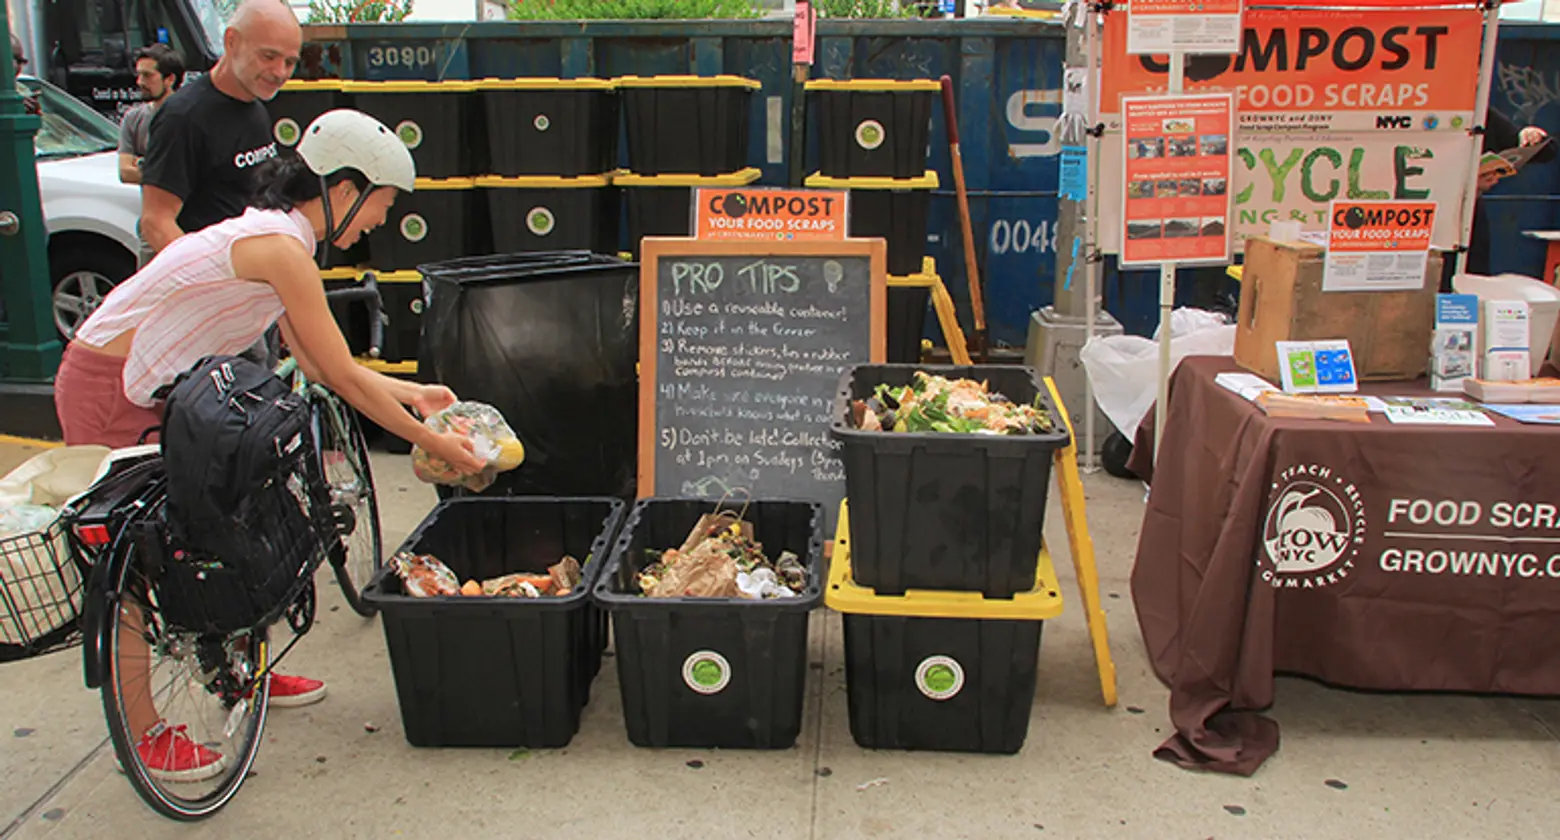 NYC lawmakers call for mandatory citywide compost program at residential buildings